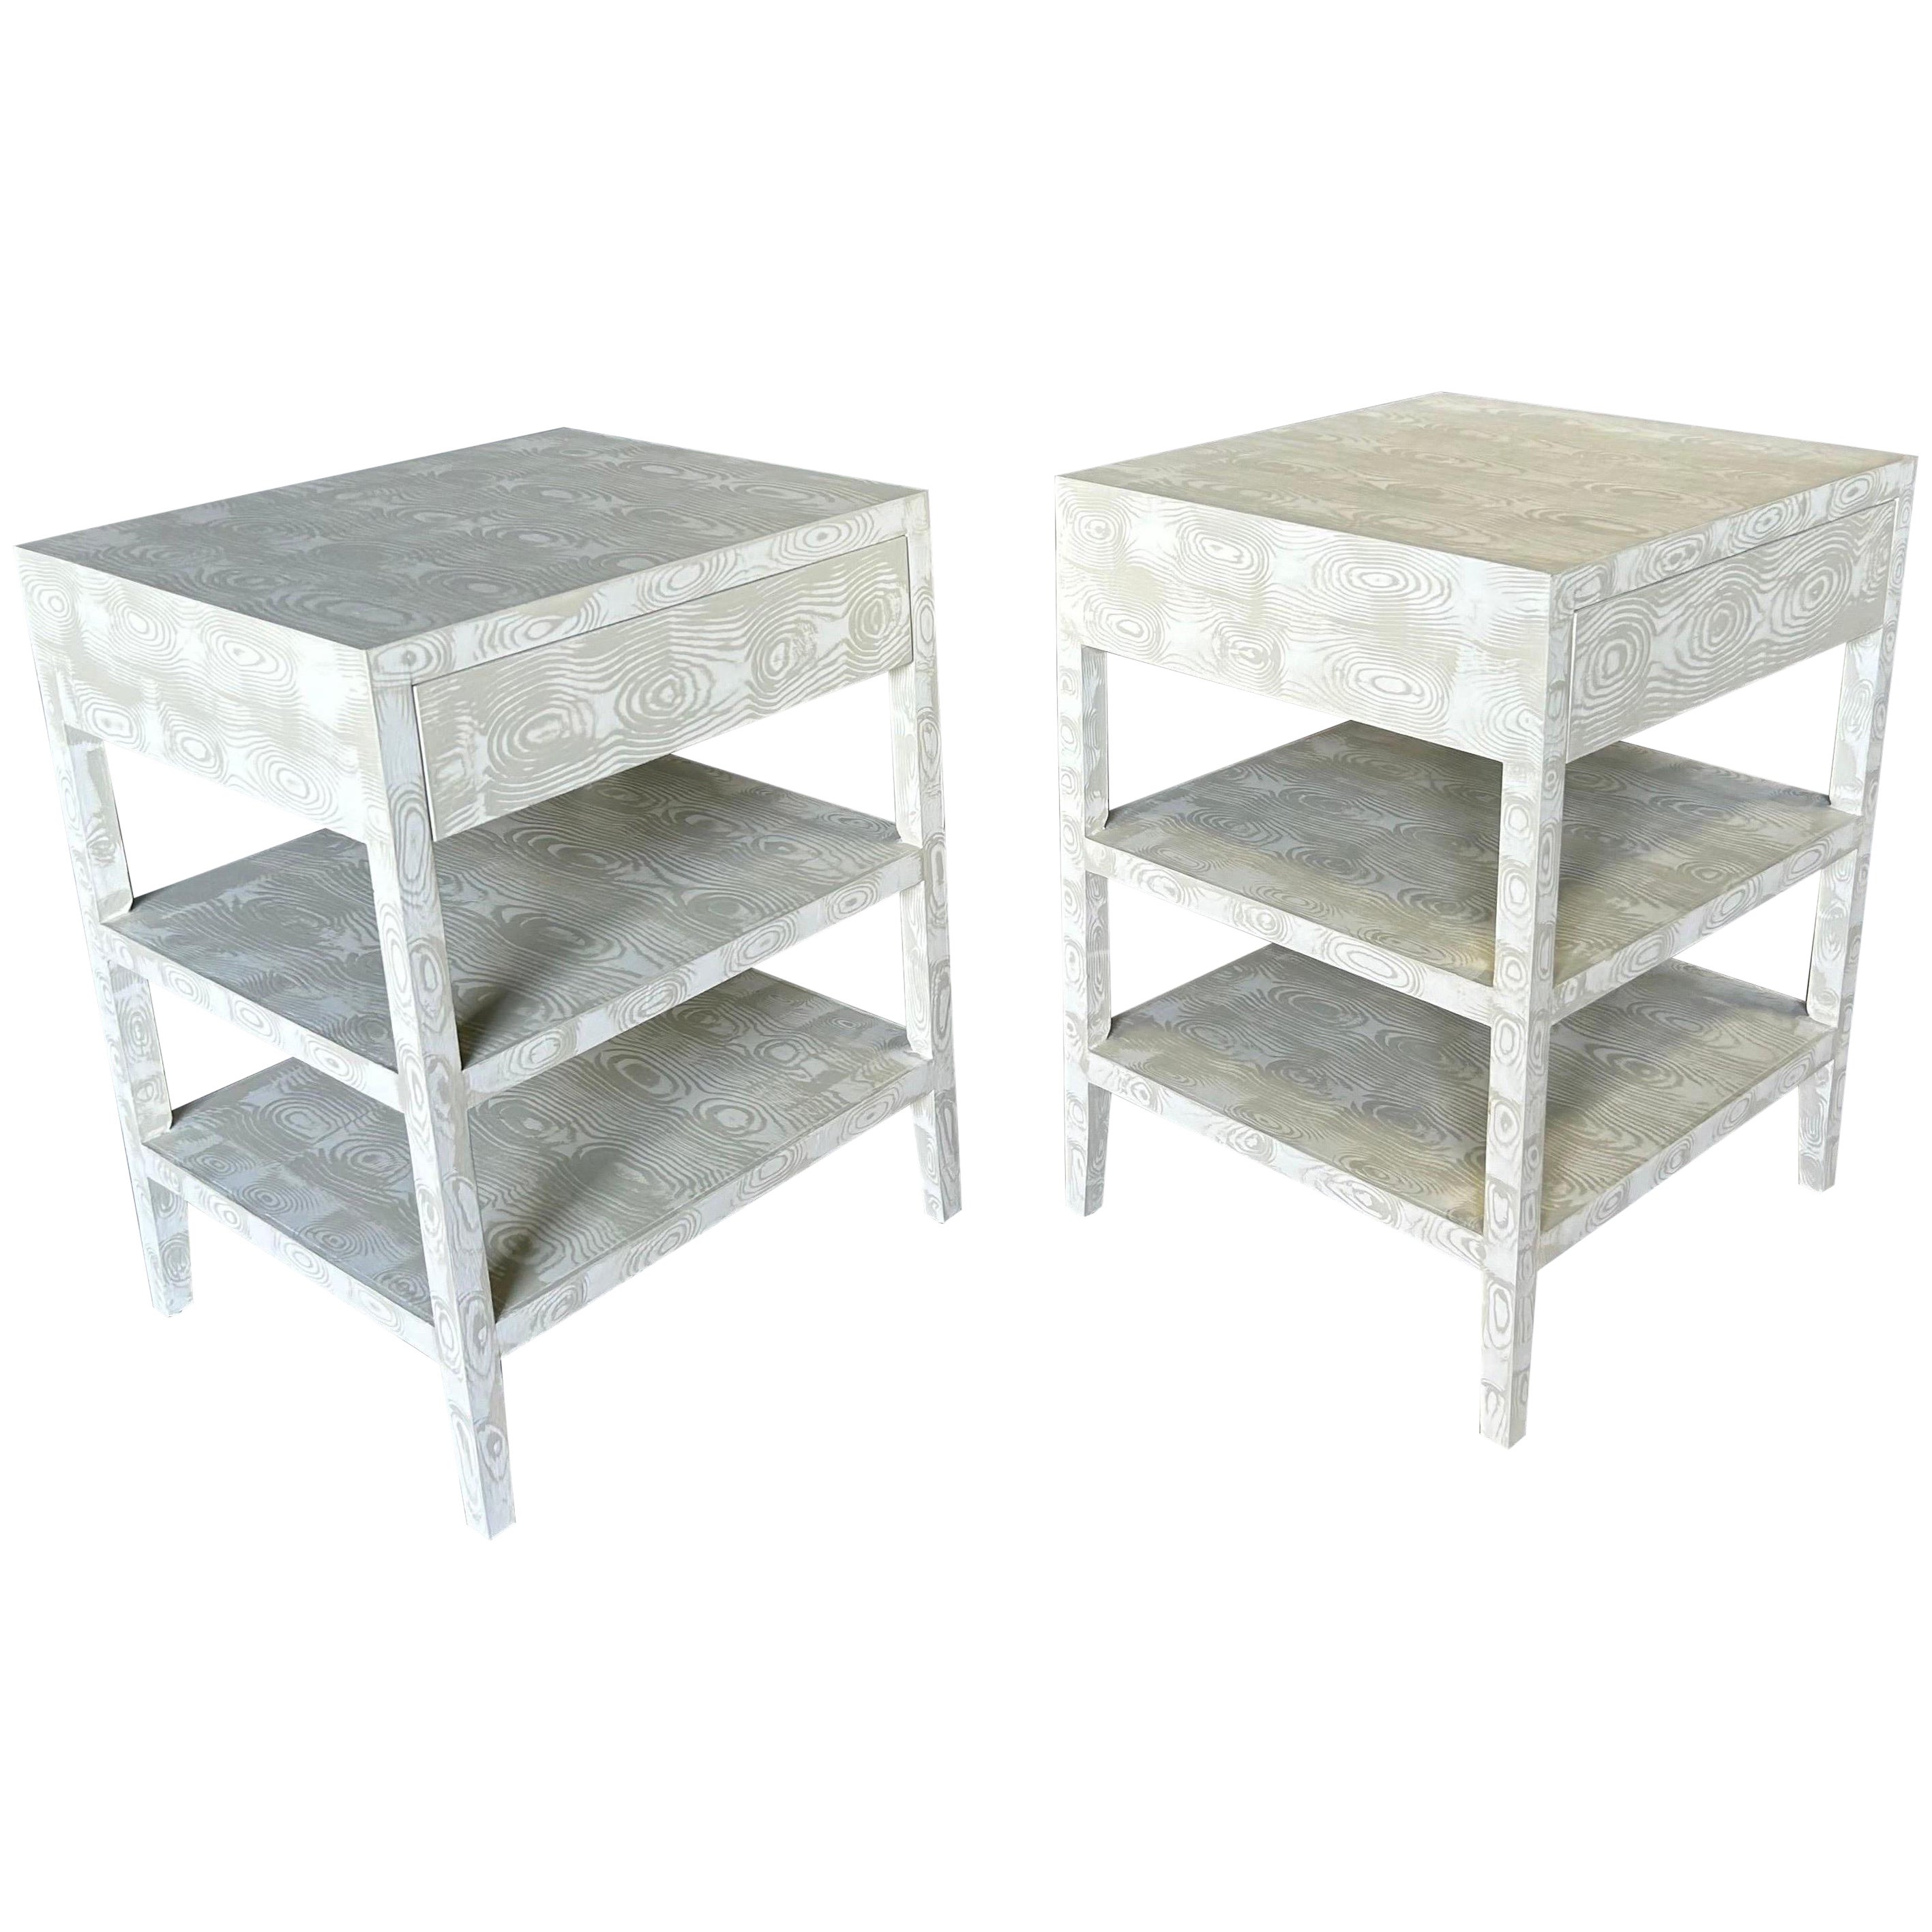 Caroline End Table with Drawer in Edgecomb Gray Faux Bois by The Fabulous Things